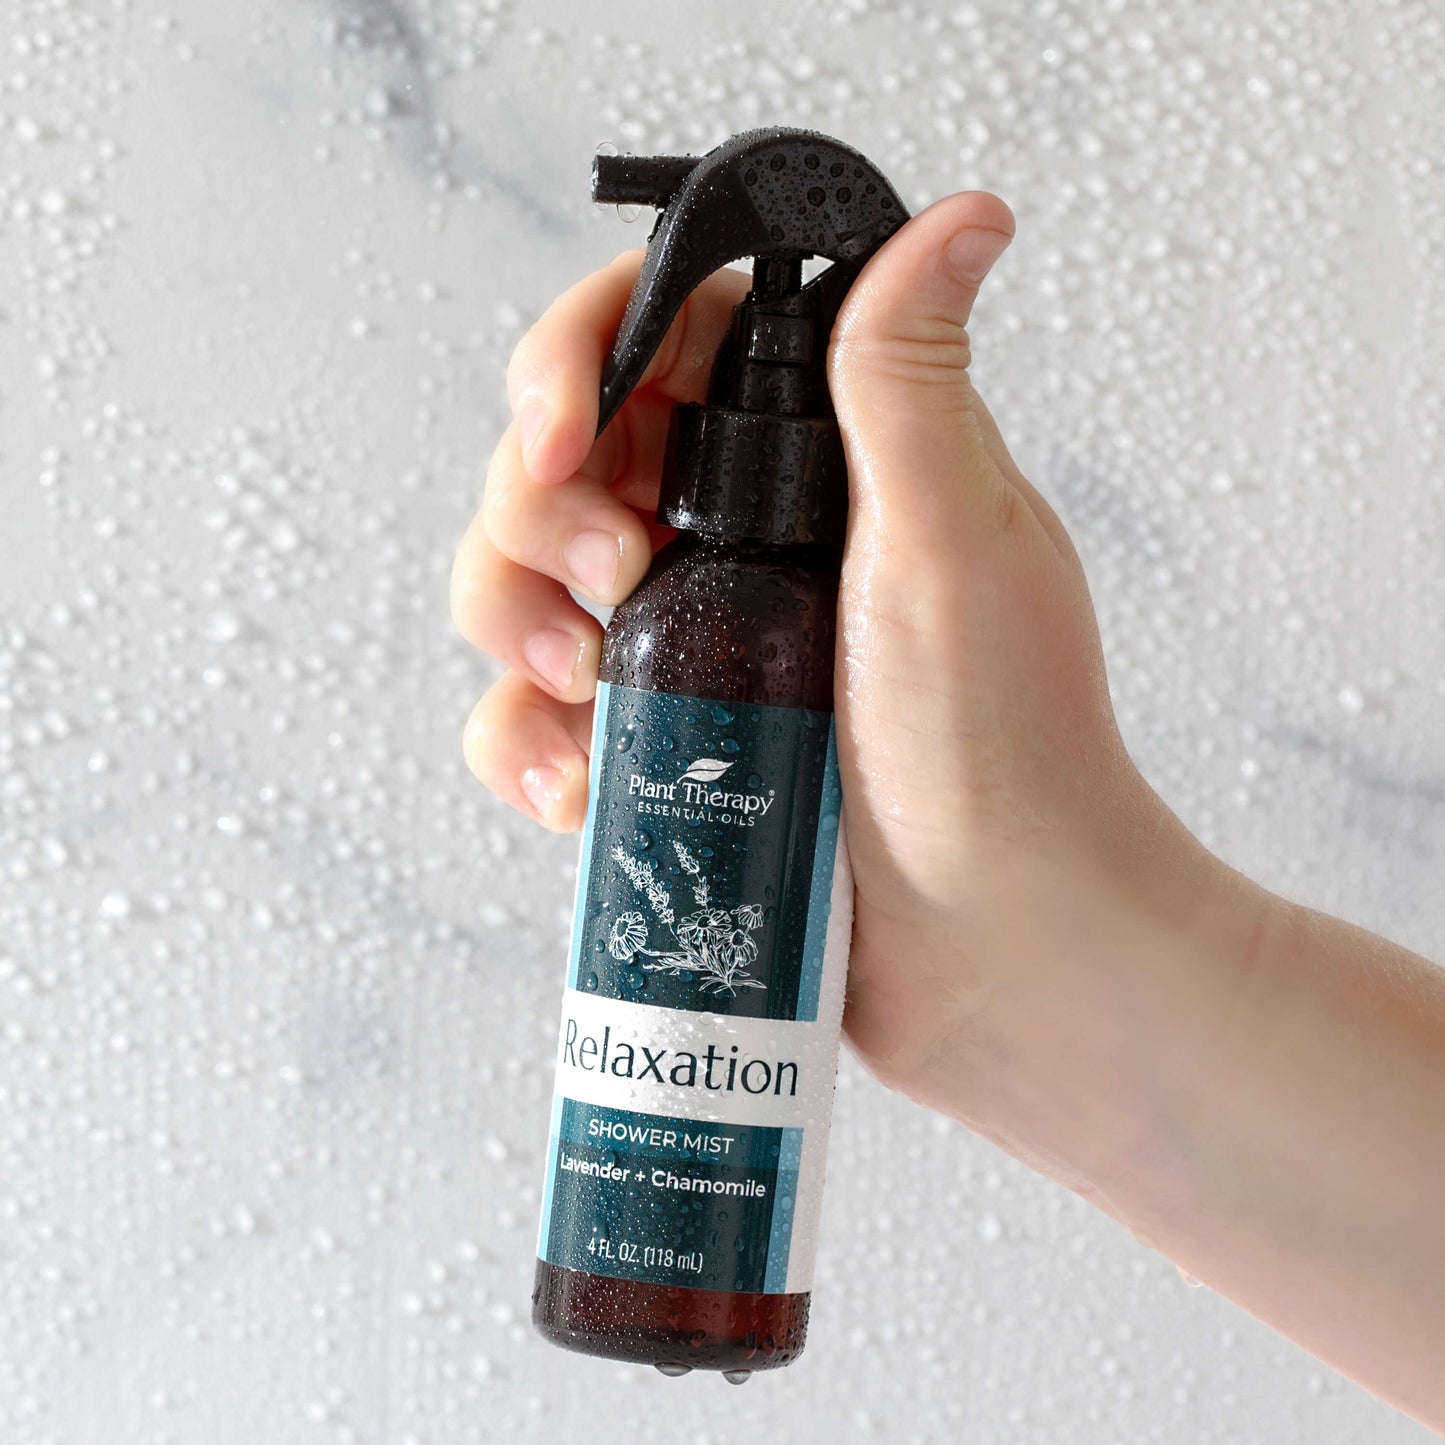 Relaxation Shower Mist in use